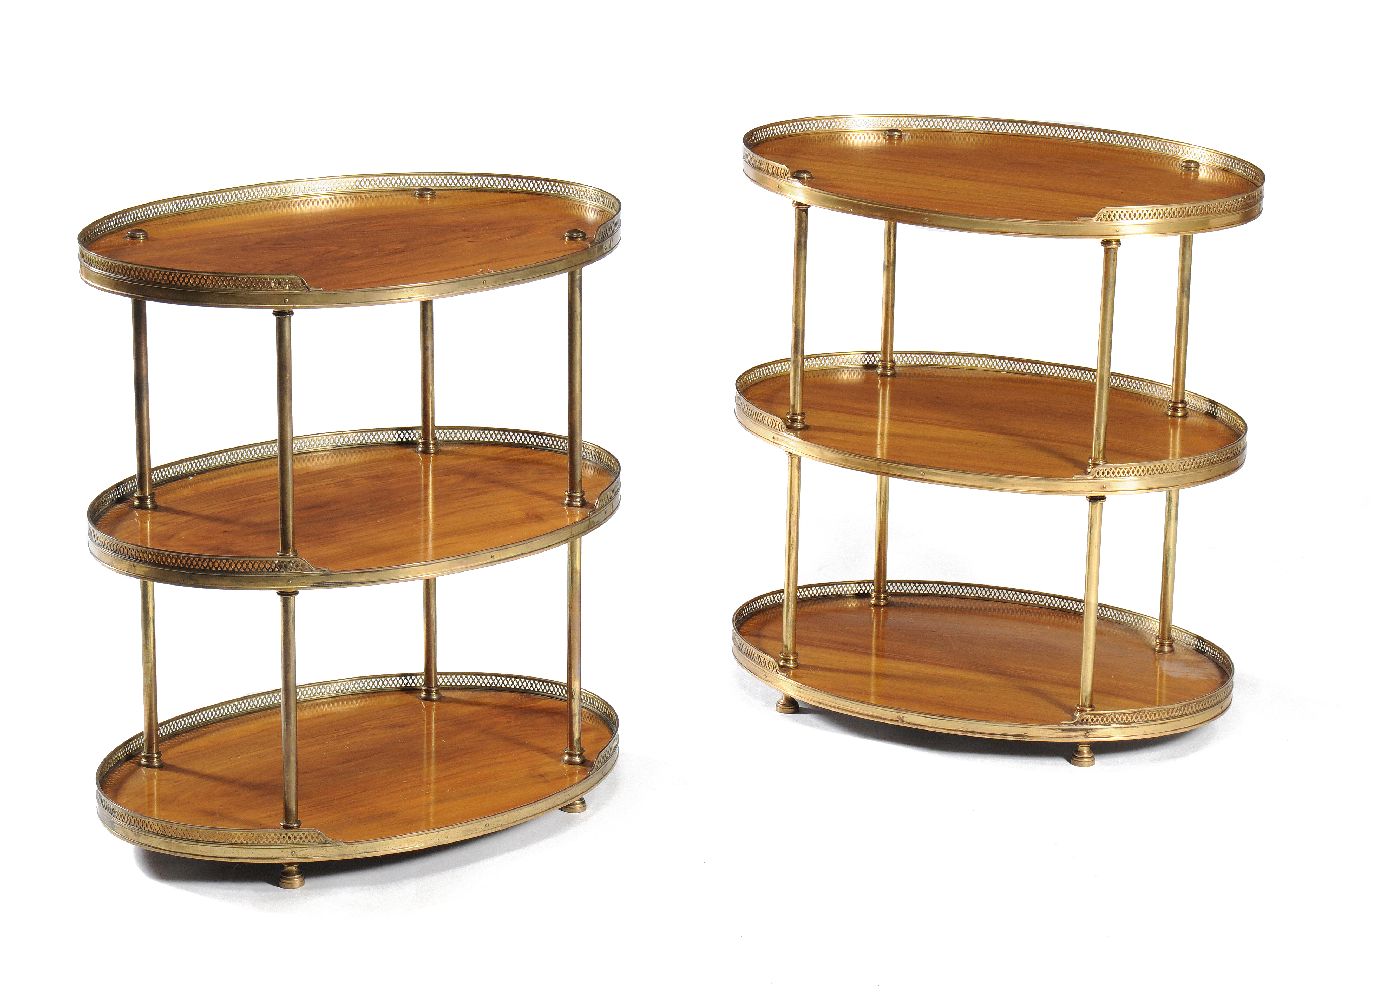 A pair of figured walnut and gilt brass mounted three tier étagères